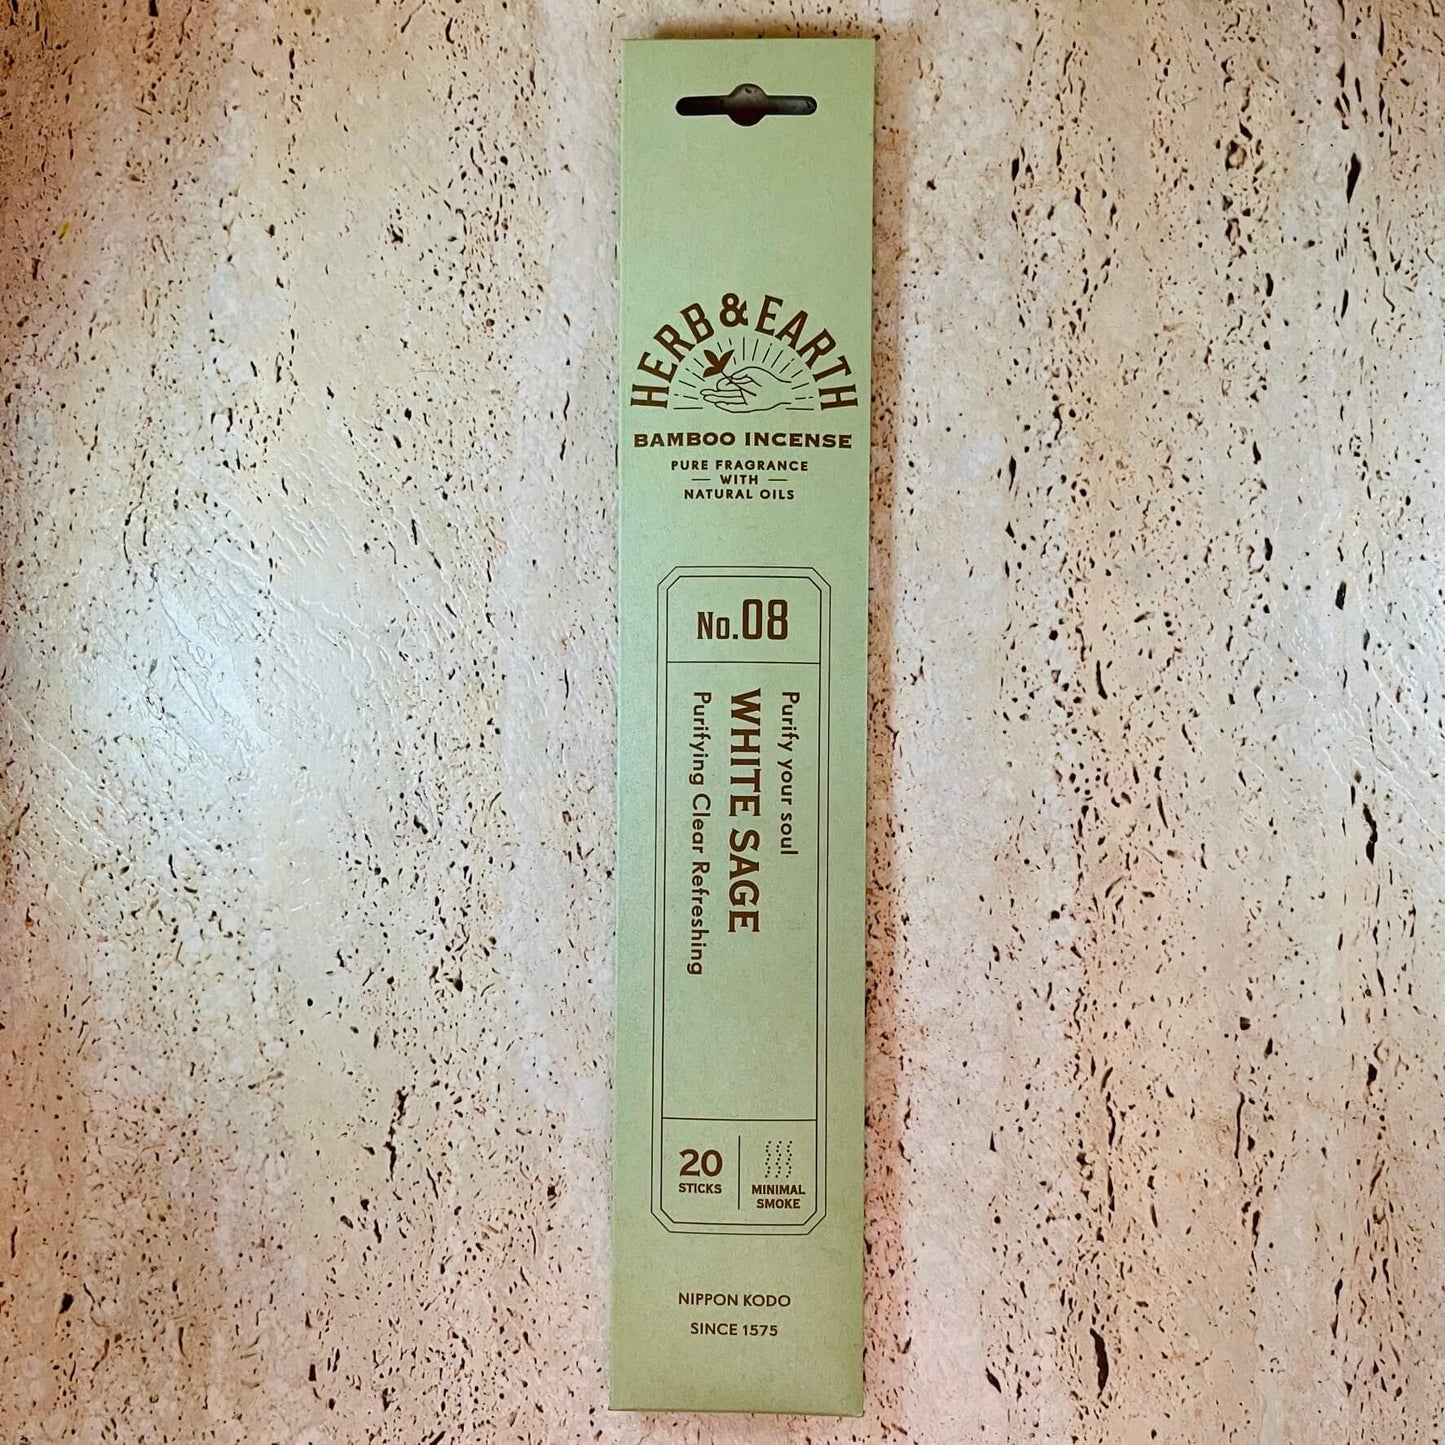 Herb & Earth Japanese Incense WHITE SAGE